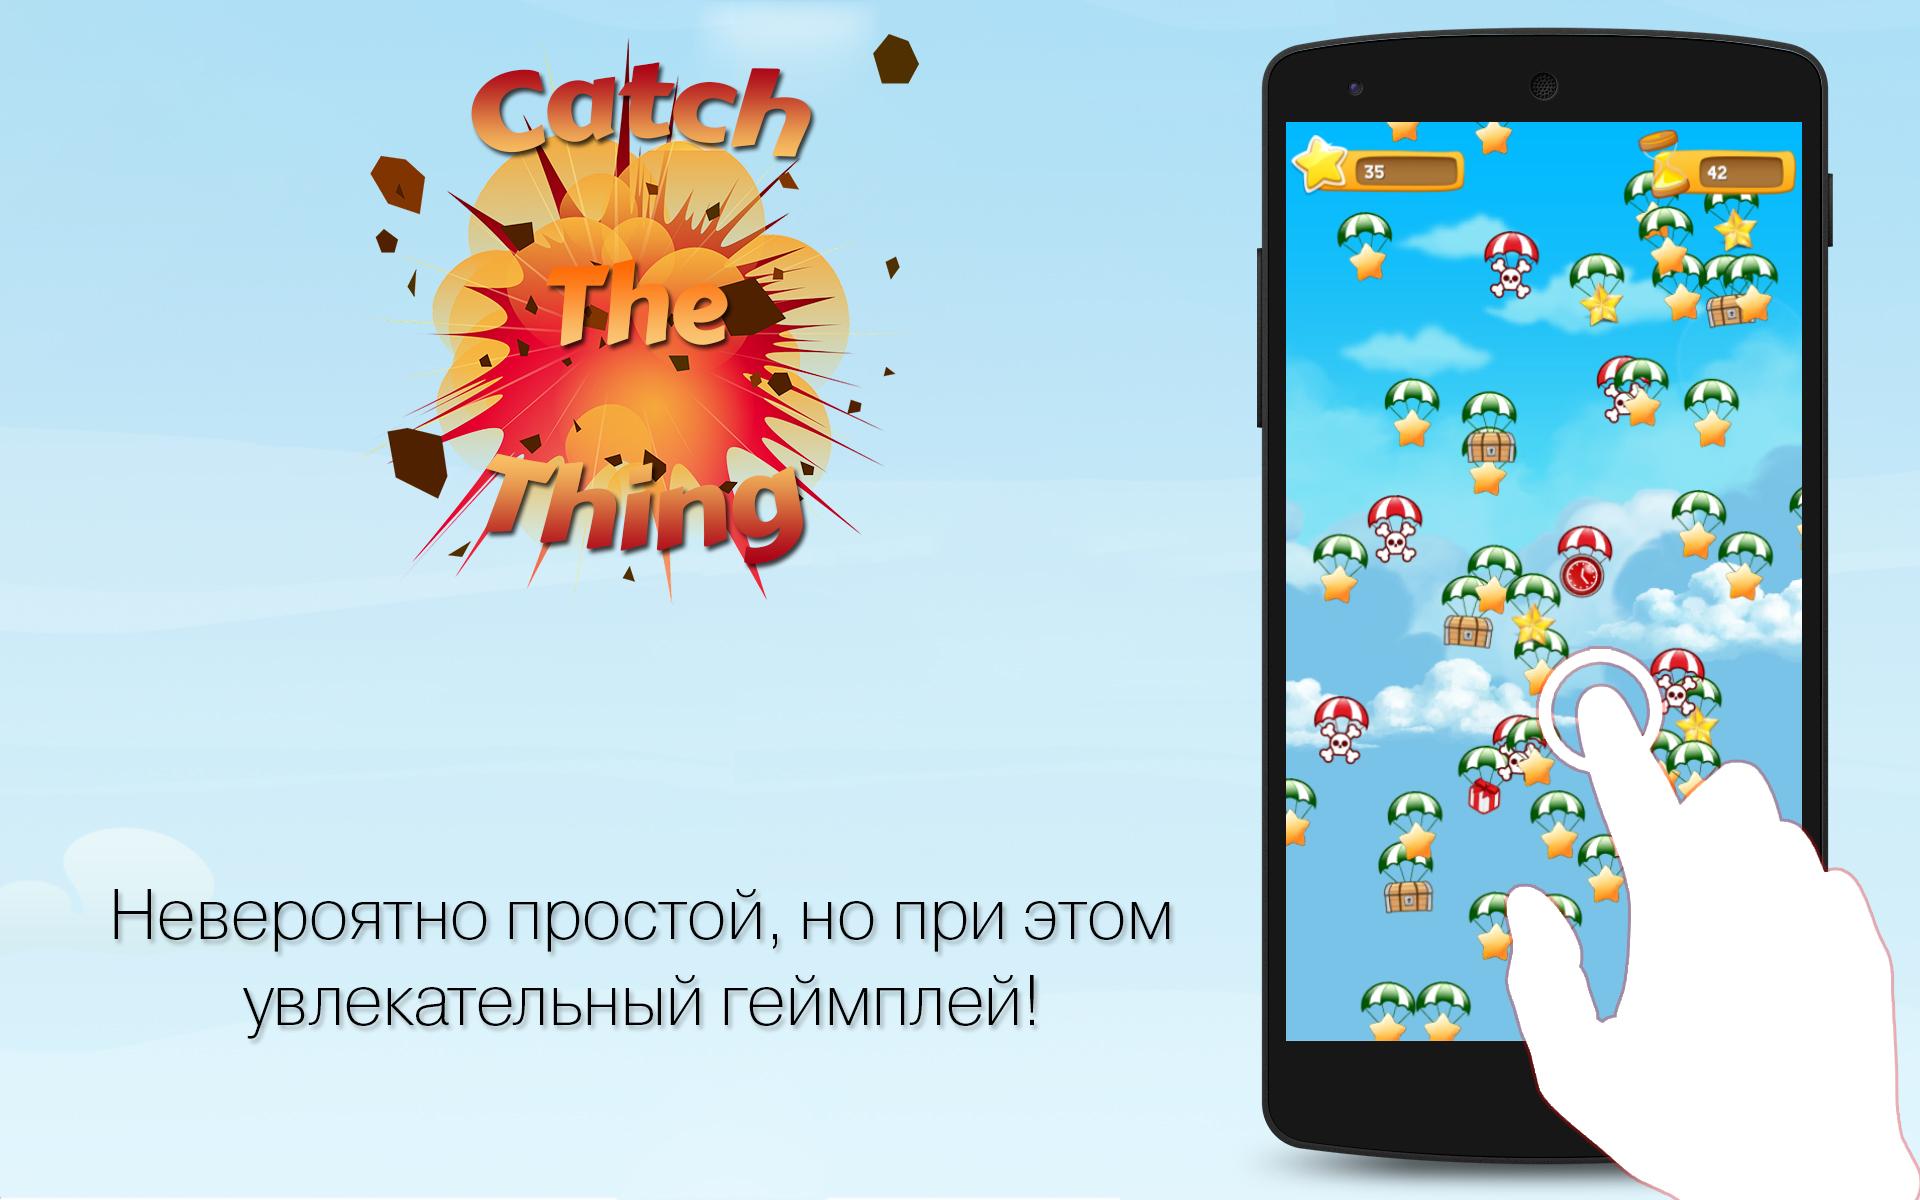 Android application Catch The Thing screenshort